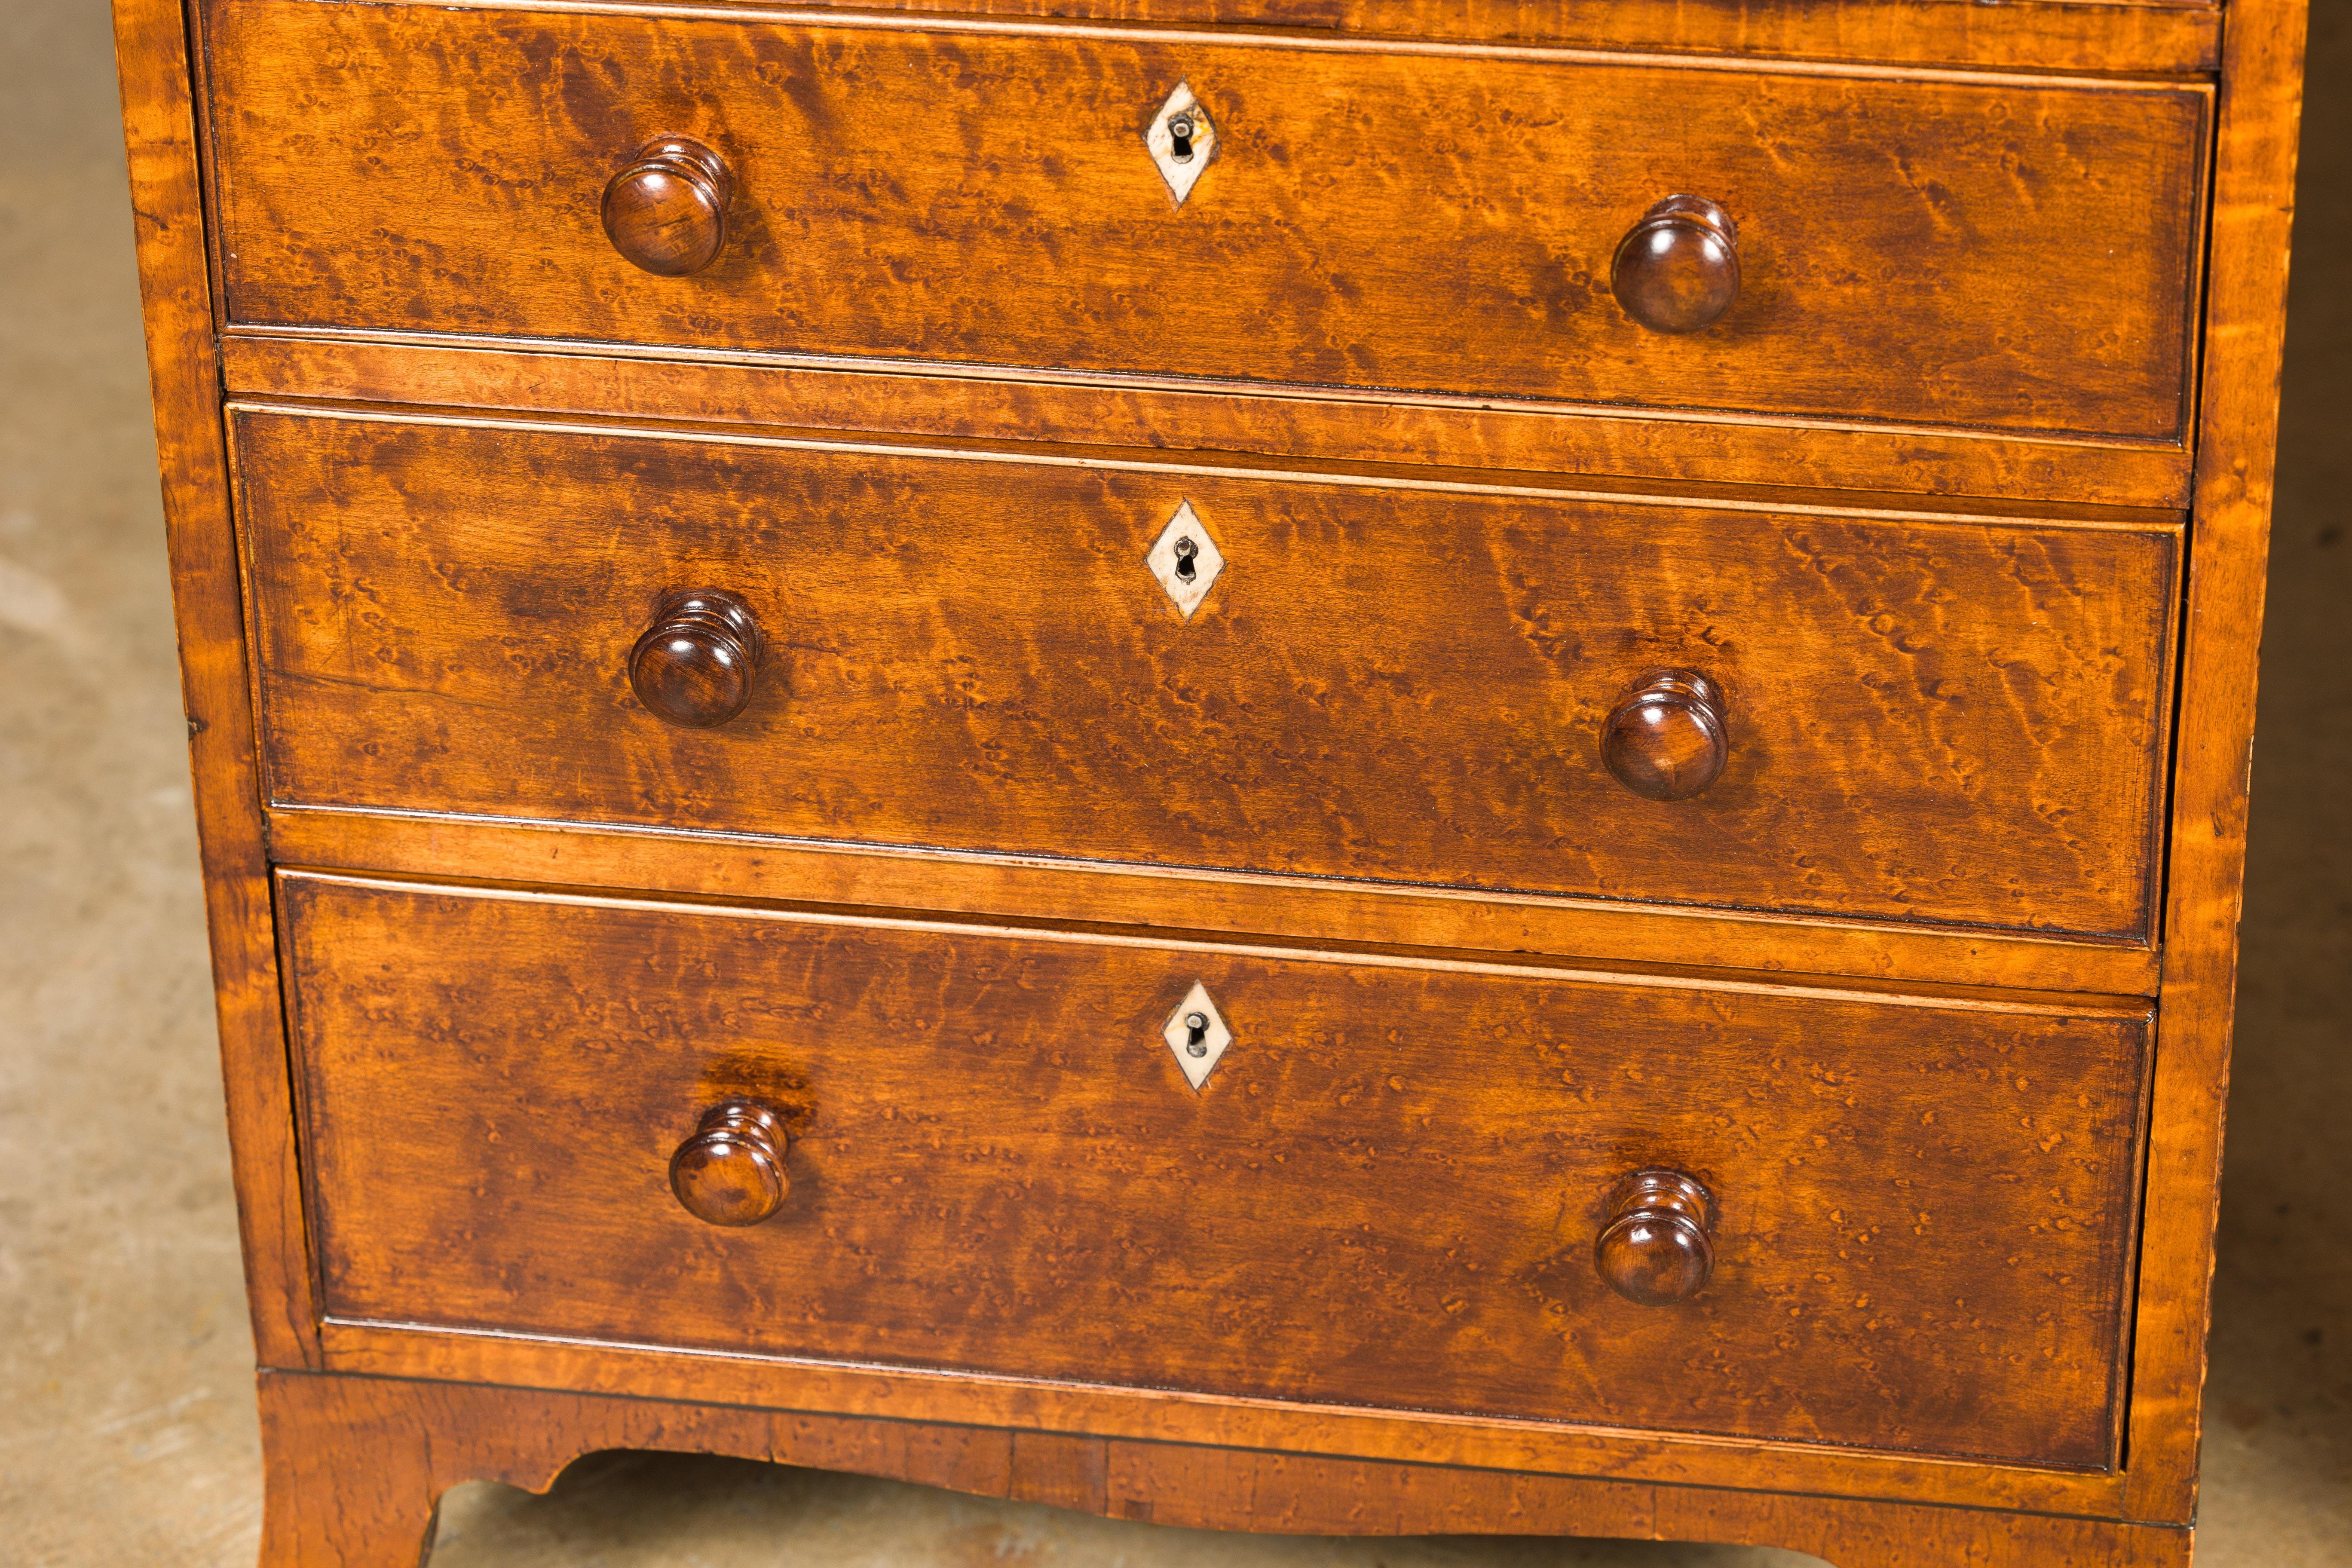 English Regency Period 1820s Bedside Chests with Graduating Drawers For Sale 7